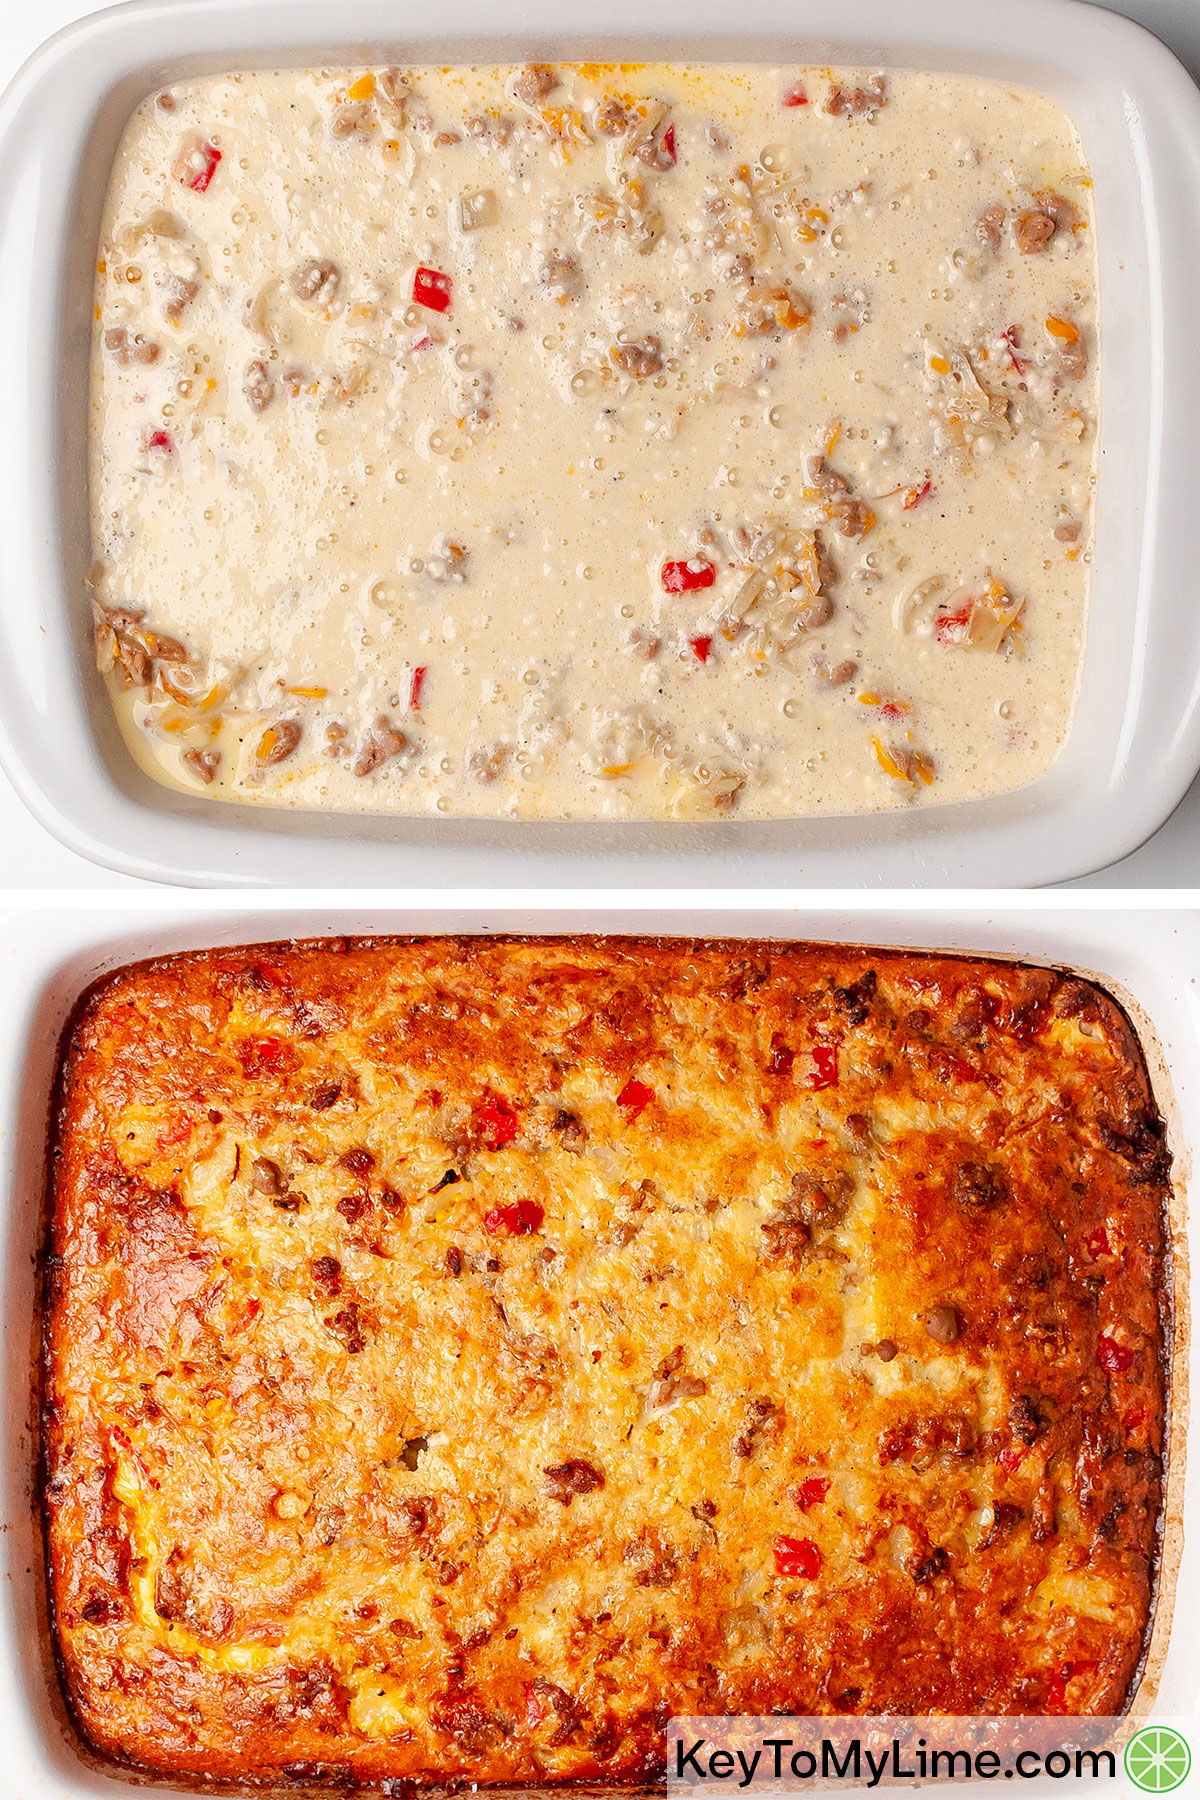 Bisquick breakfast casserole before and after baking.